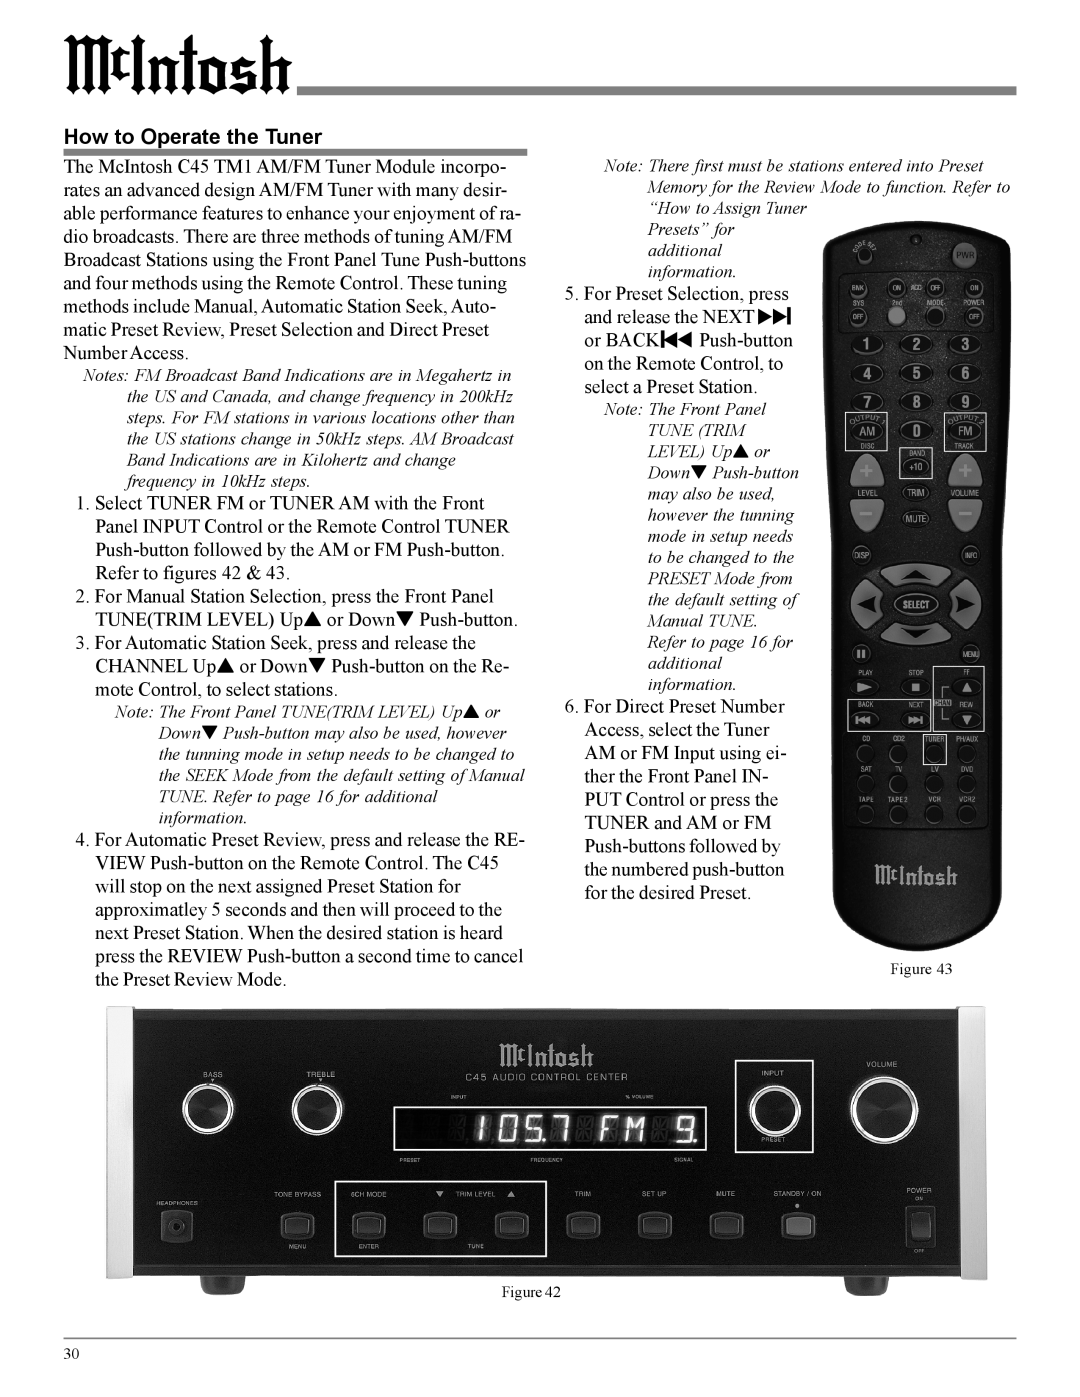 McIntosh C45 owner manual How to Operate the Tuner 